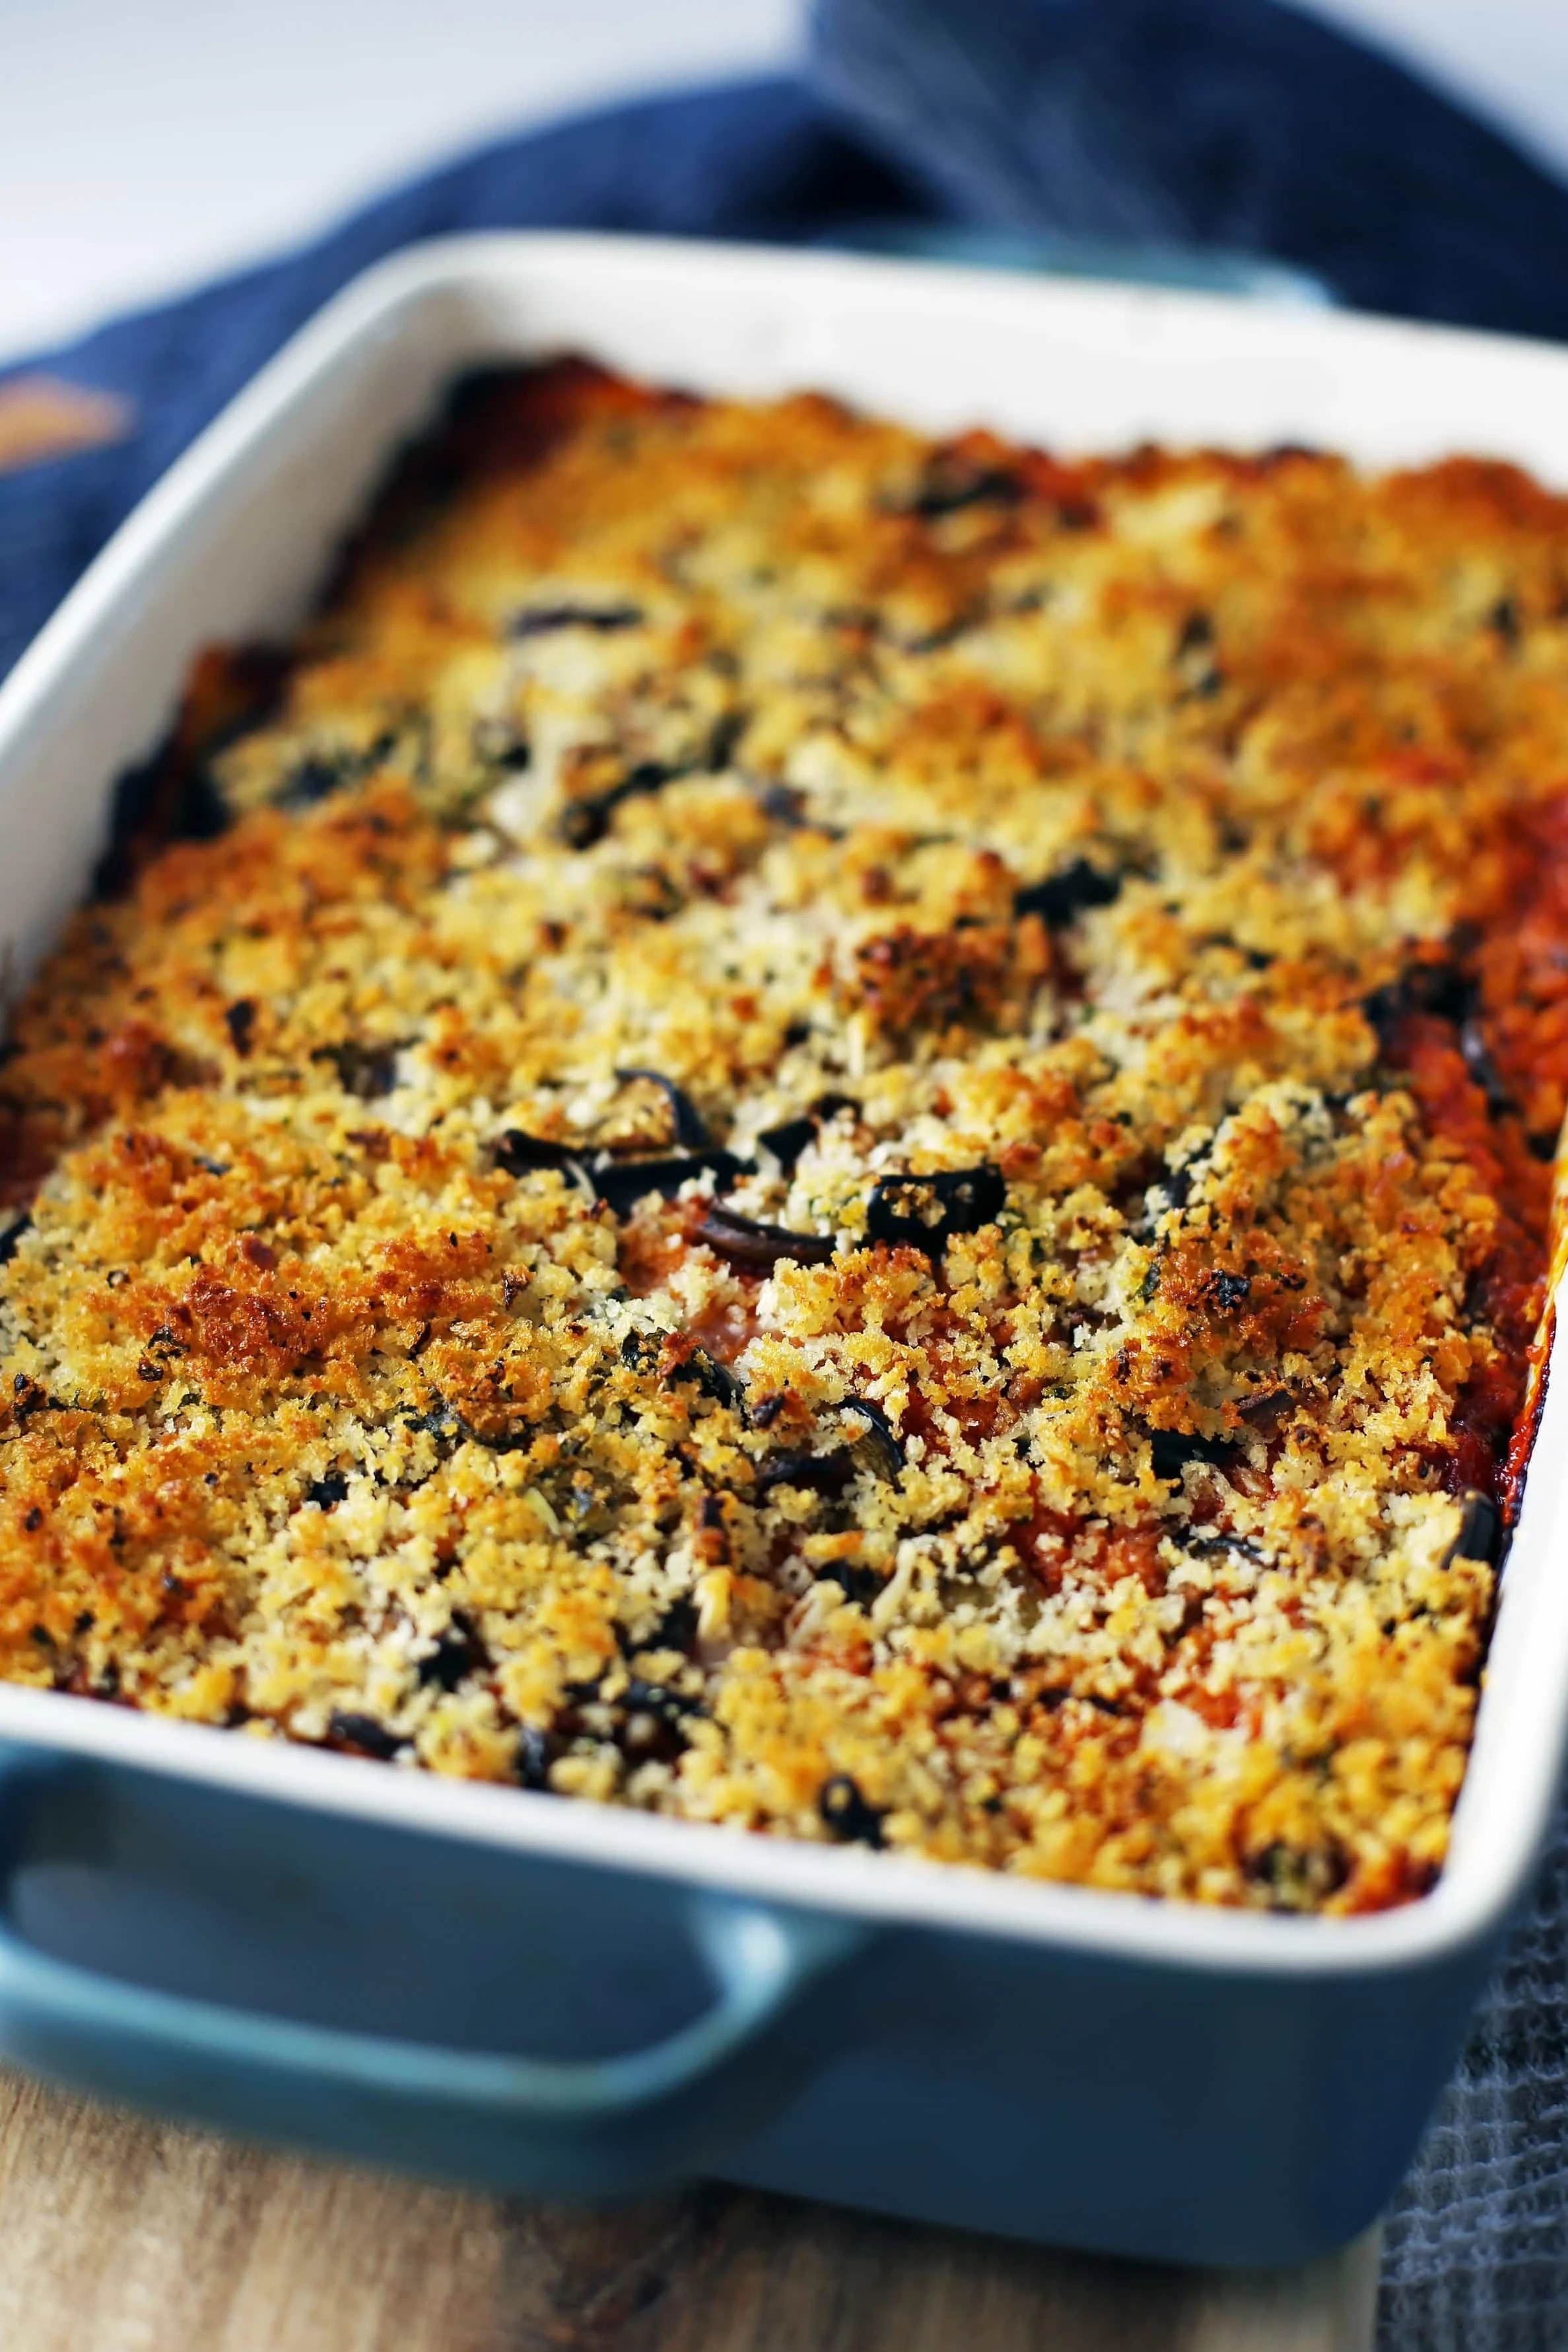 Baked Eggplant Parmesan Casserole with a golden-brown Panko breadcrumb topping in a large blue rectangular dish.